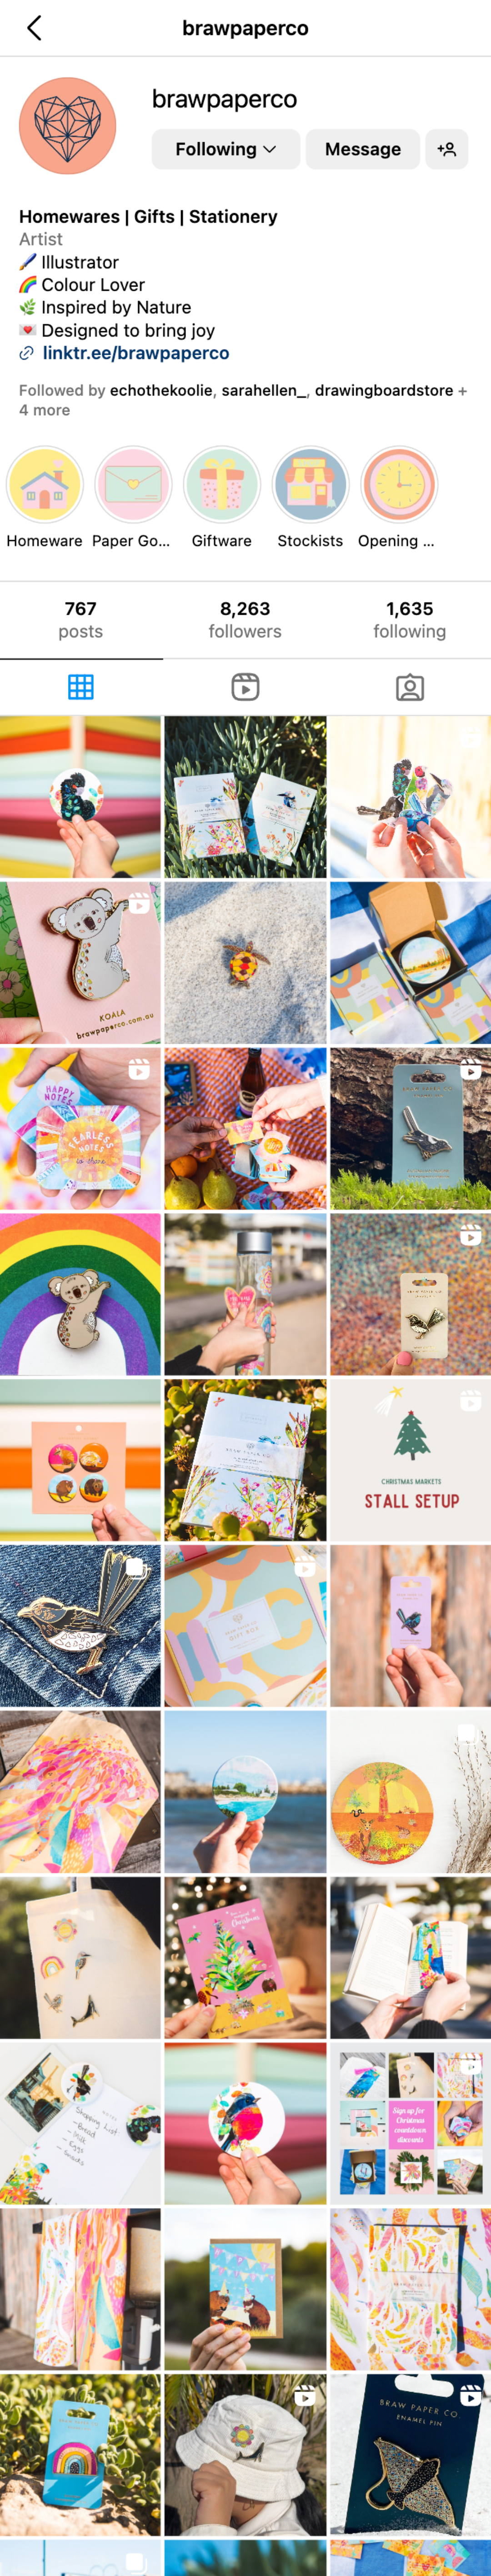 Braw Paper Co Instagram feed on mobile